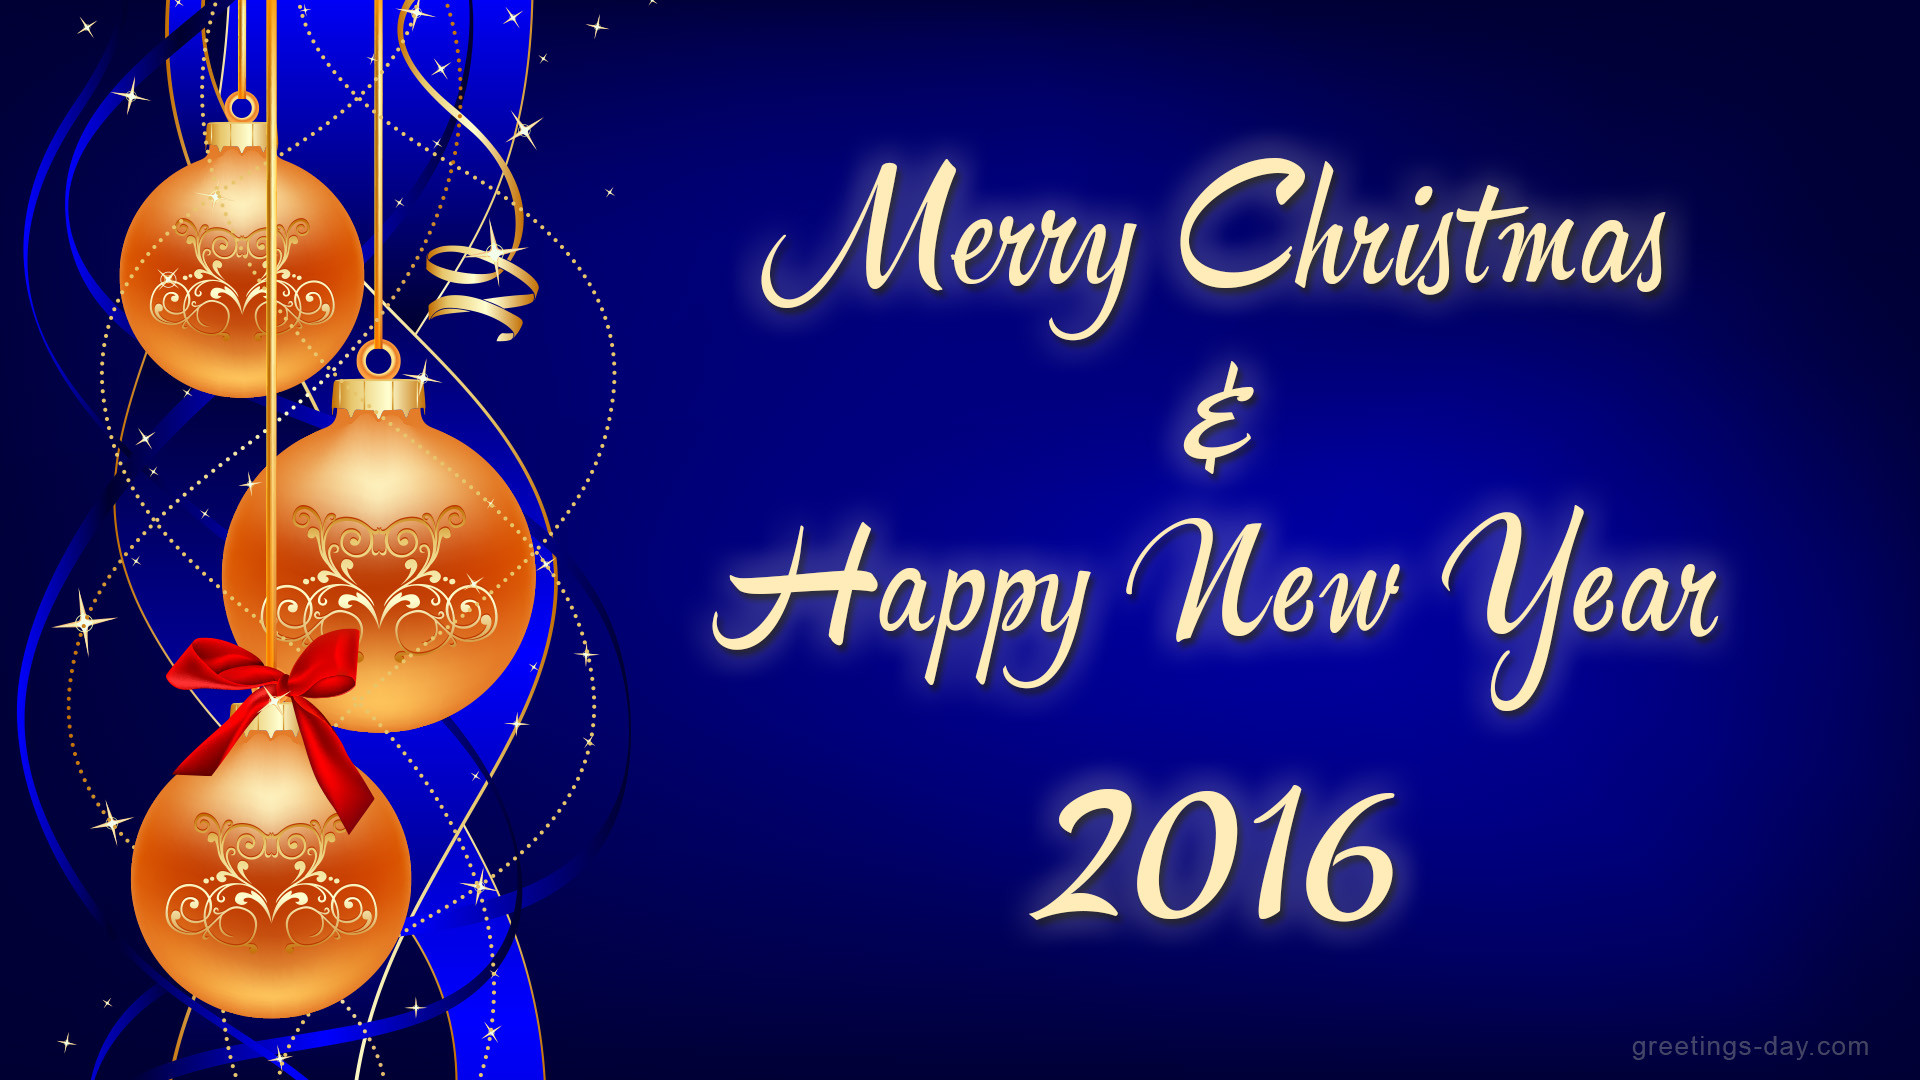 1920x1080 Christmas & New Year - Greeting Cards, Pictures, Animated GIFs